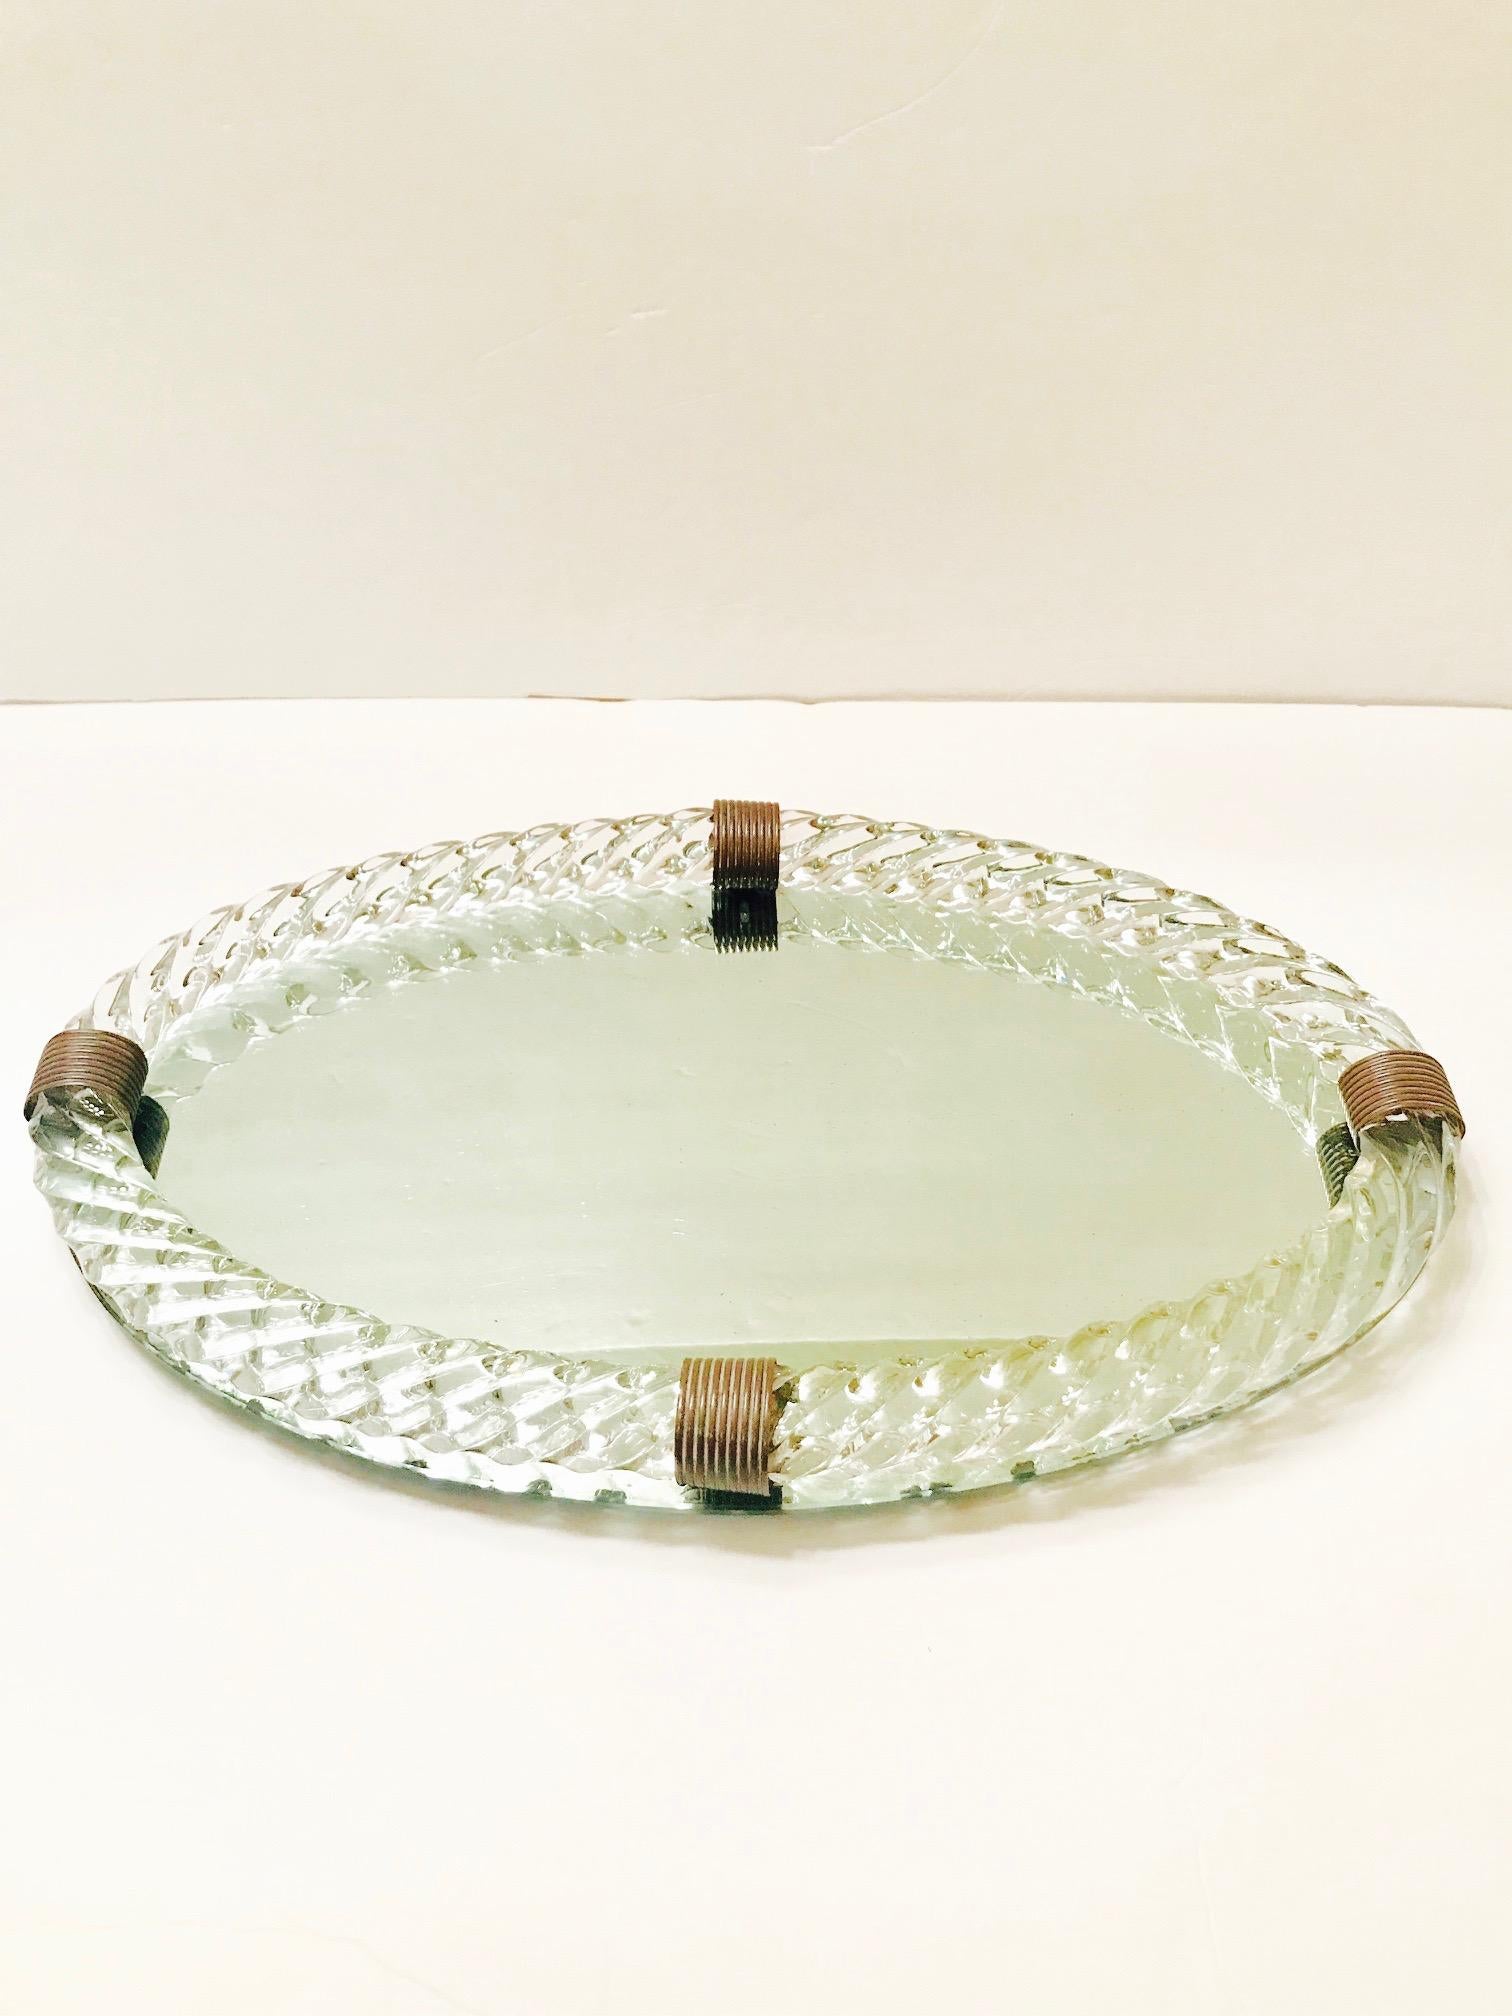 Mid-20th Century 1940s Mirrored Vanity Tray with Murano Glass Rope Gallery by Venini